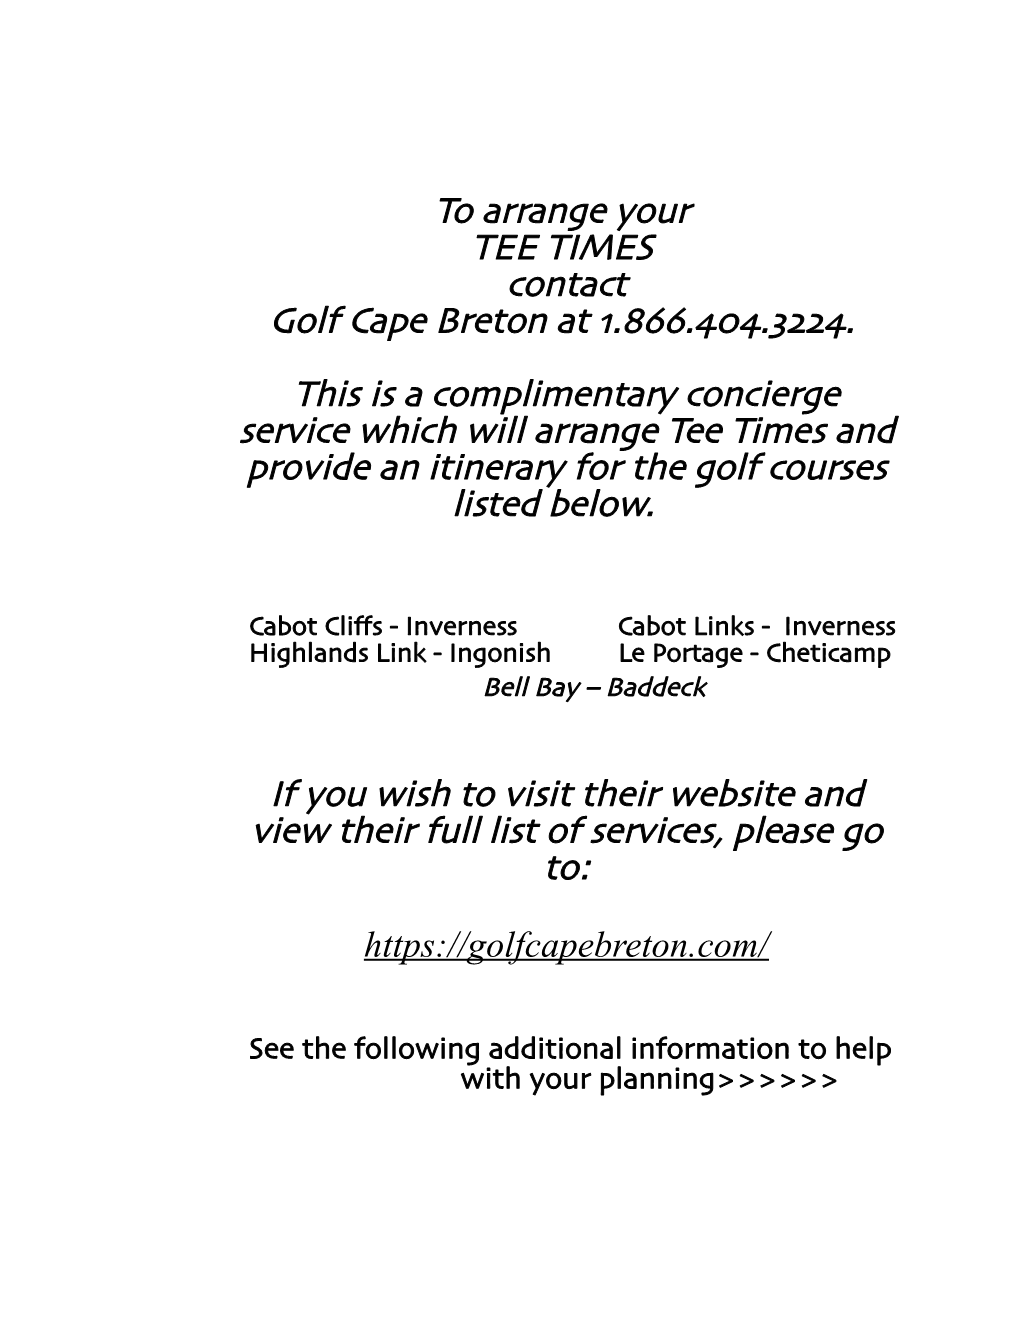 To Arrange Your TEE TIMES Contact Golf Cape Breton at 1.866.404.3224